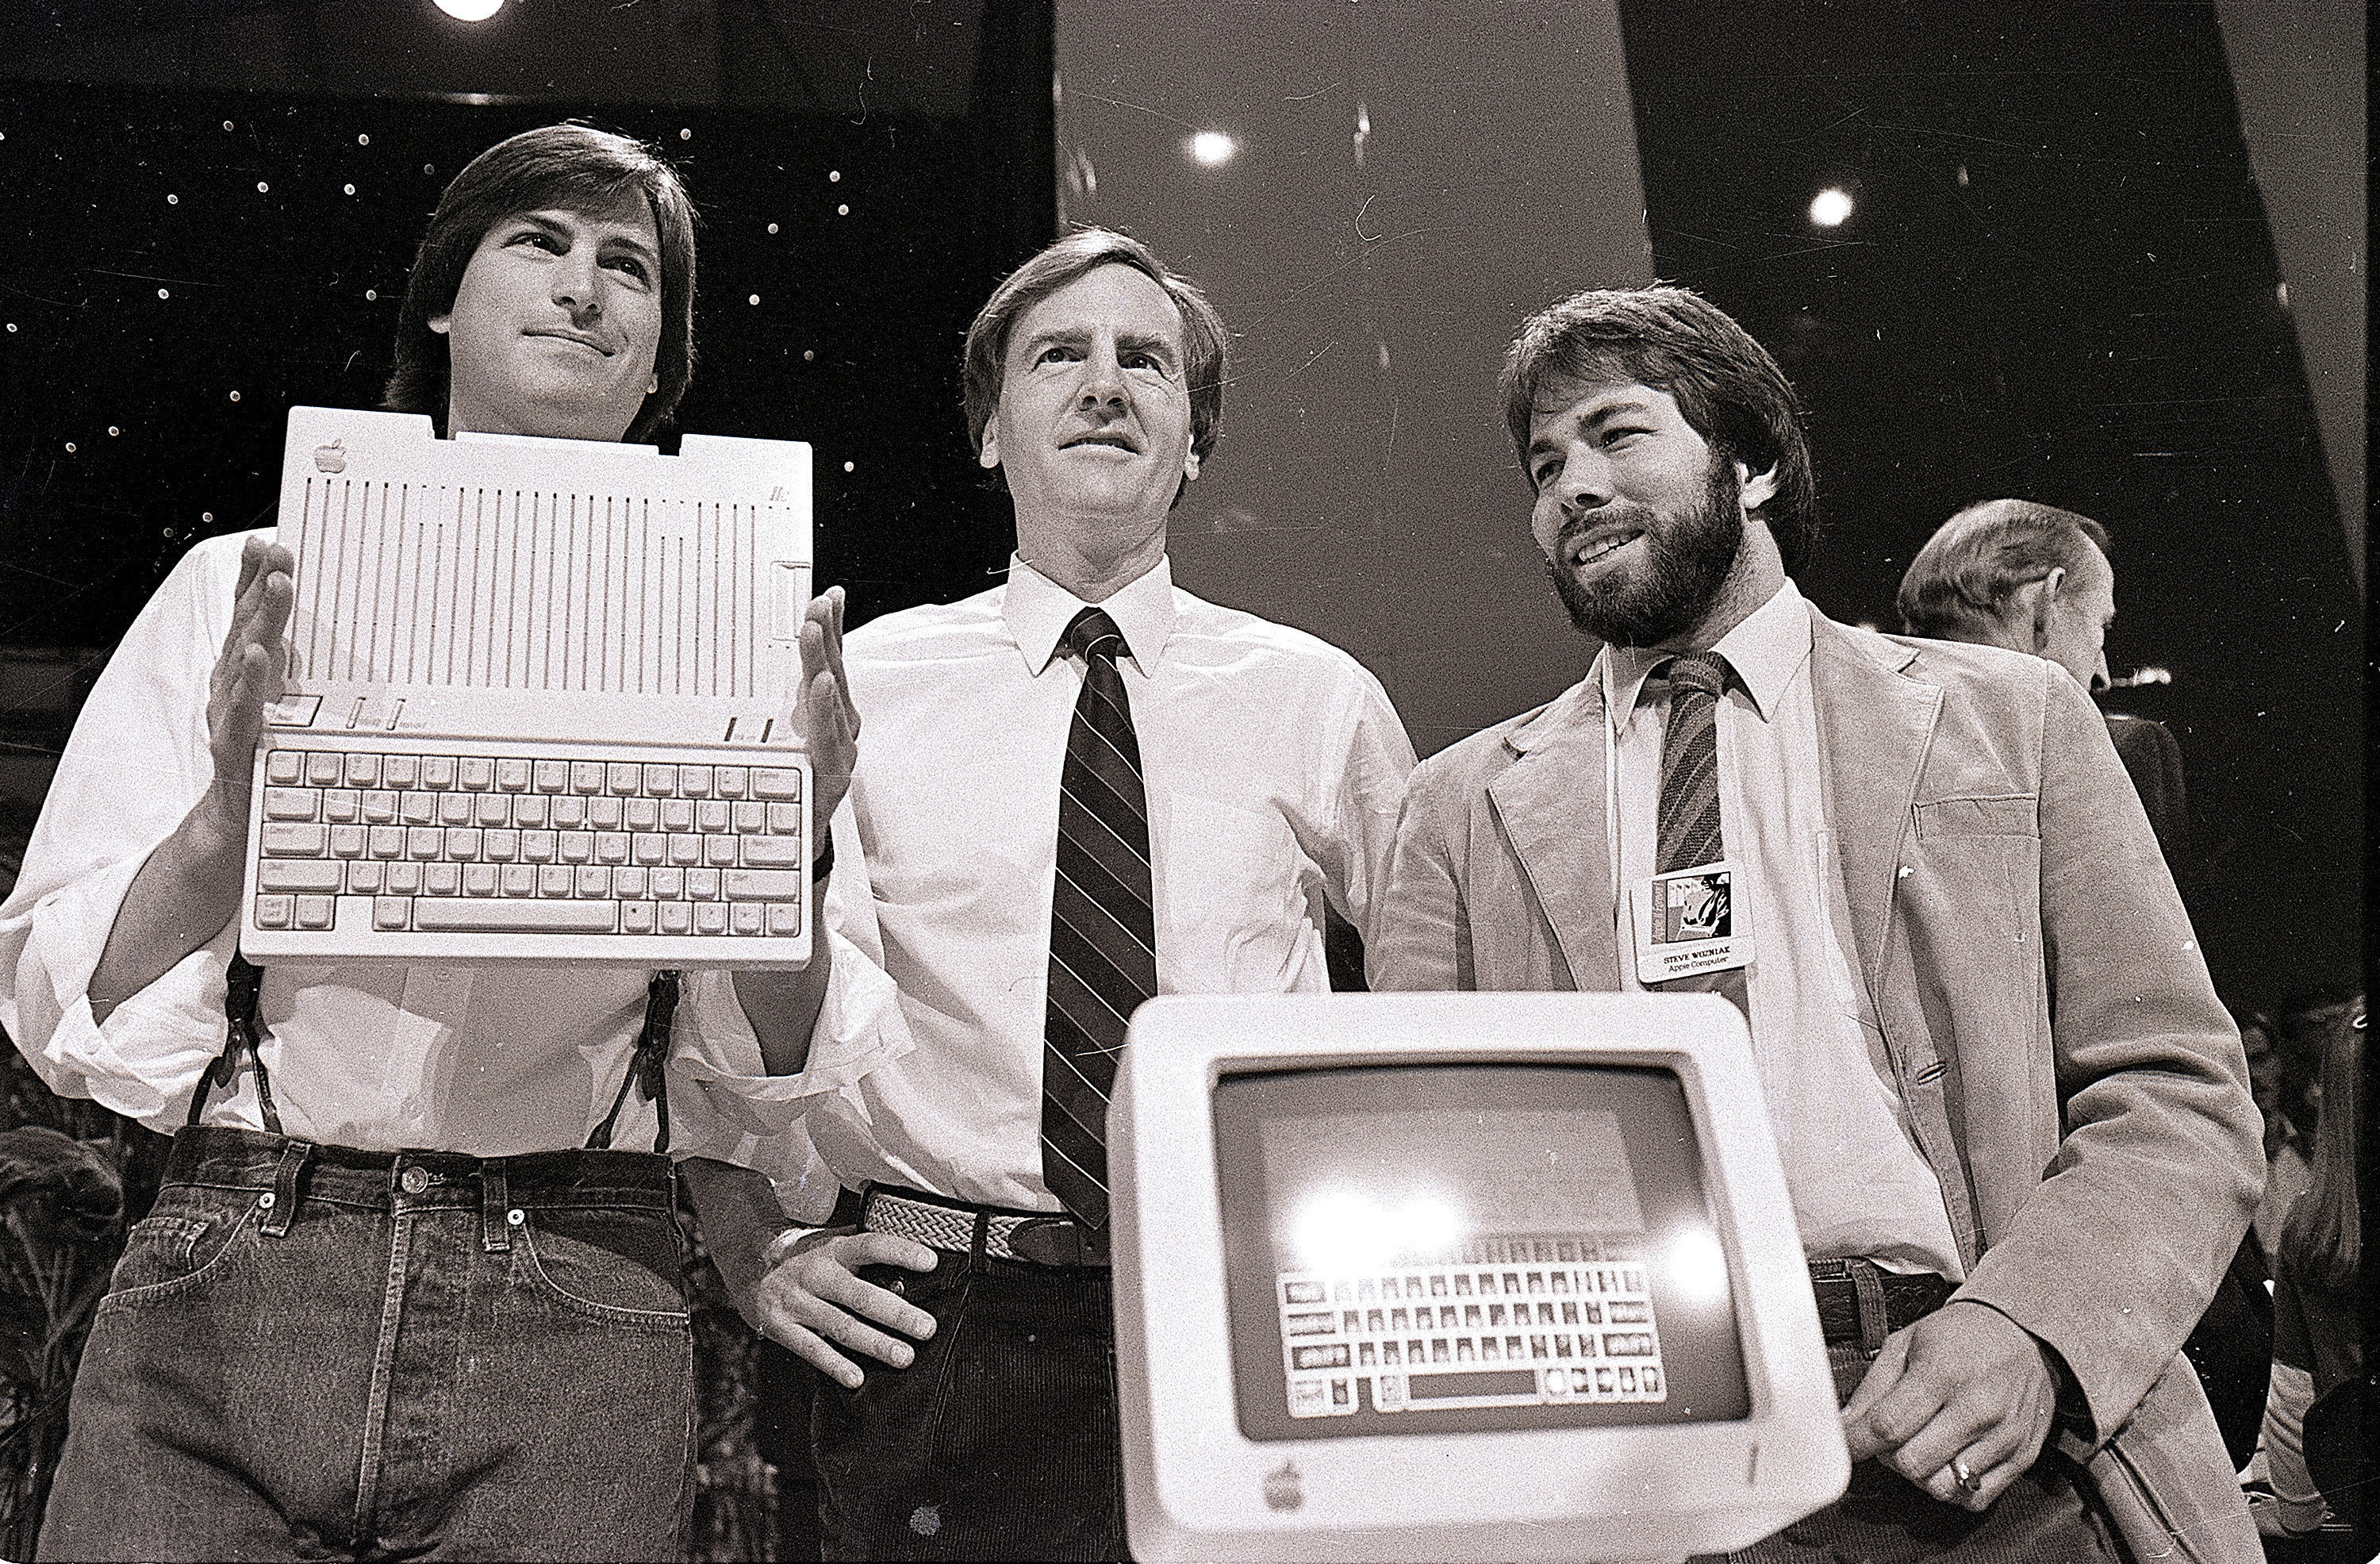 Steve Jobs, left, chairman of Apple Computers, John Sculley, centre, president and CEO, and Steve Wozniak, co-founder of Apple, unveil the new Apple IIc computer in San Francisco. (AP Photo/Sal Veder, File)